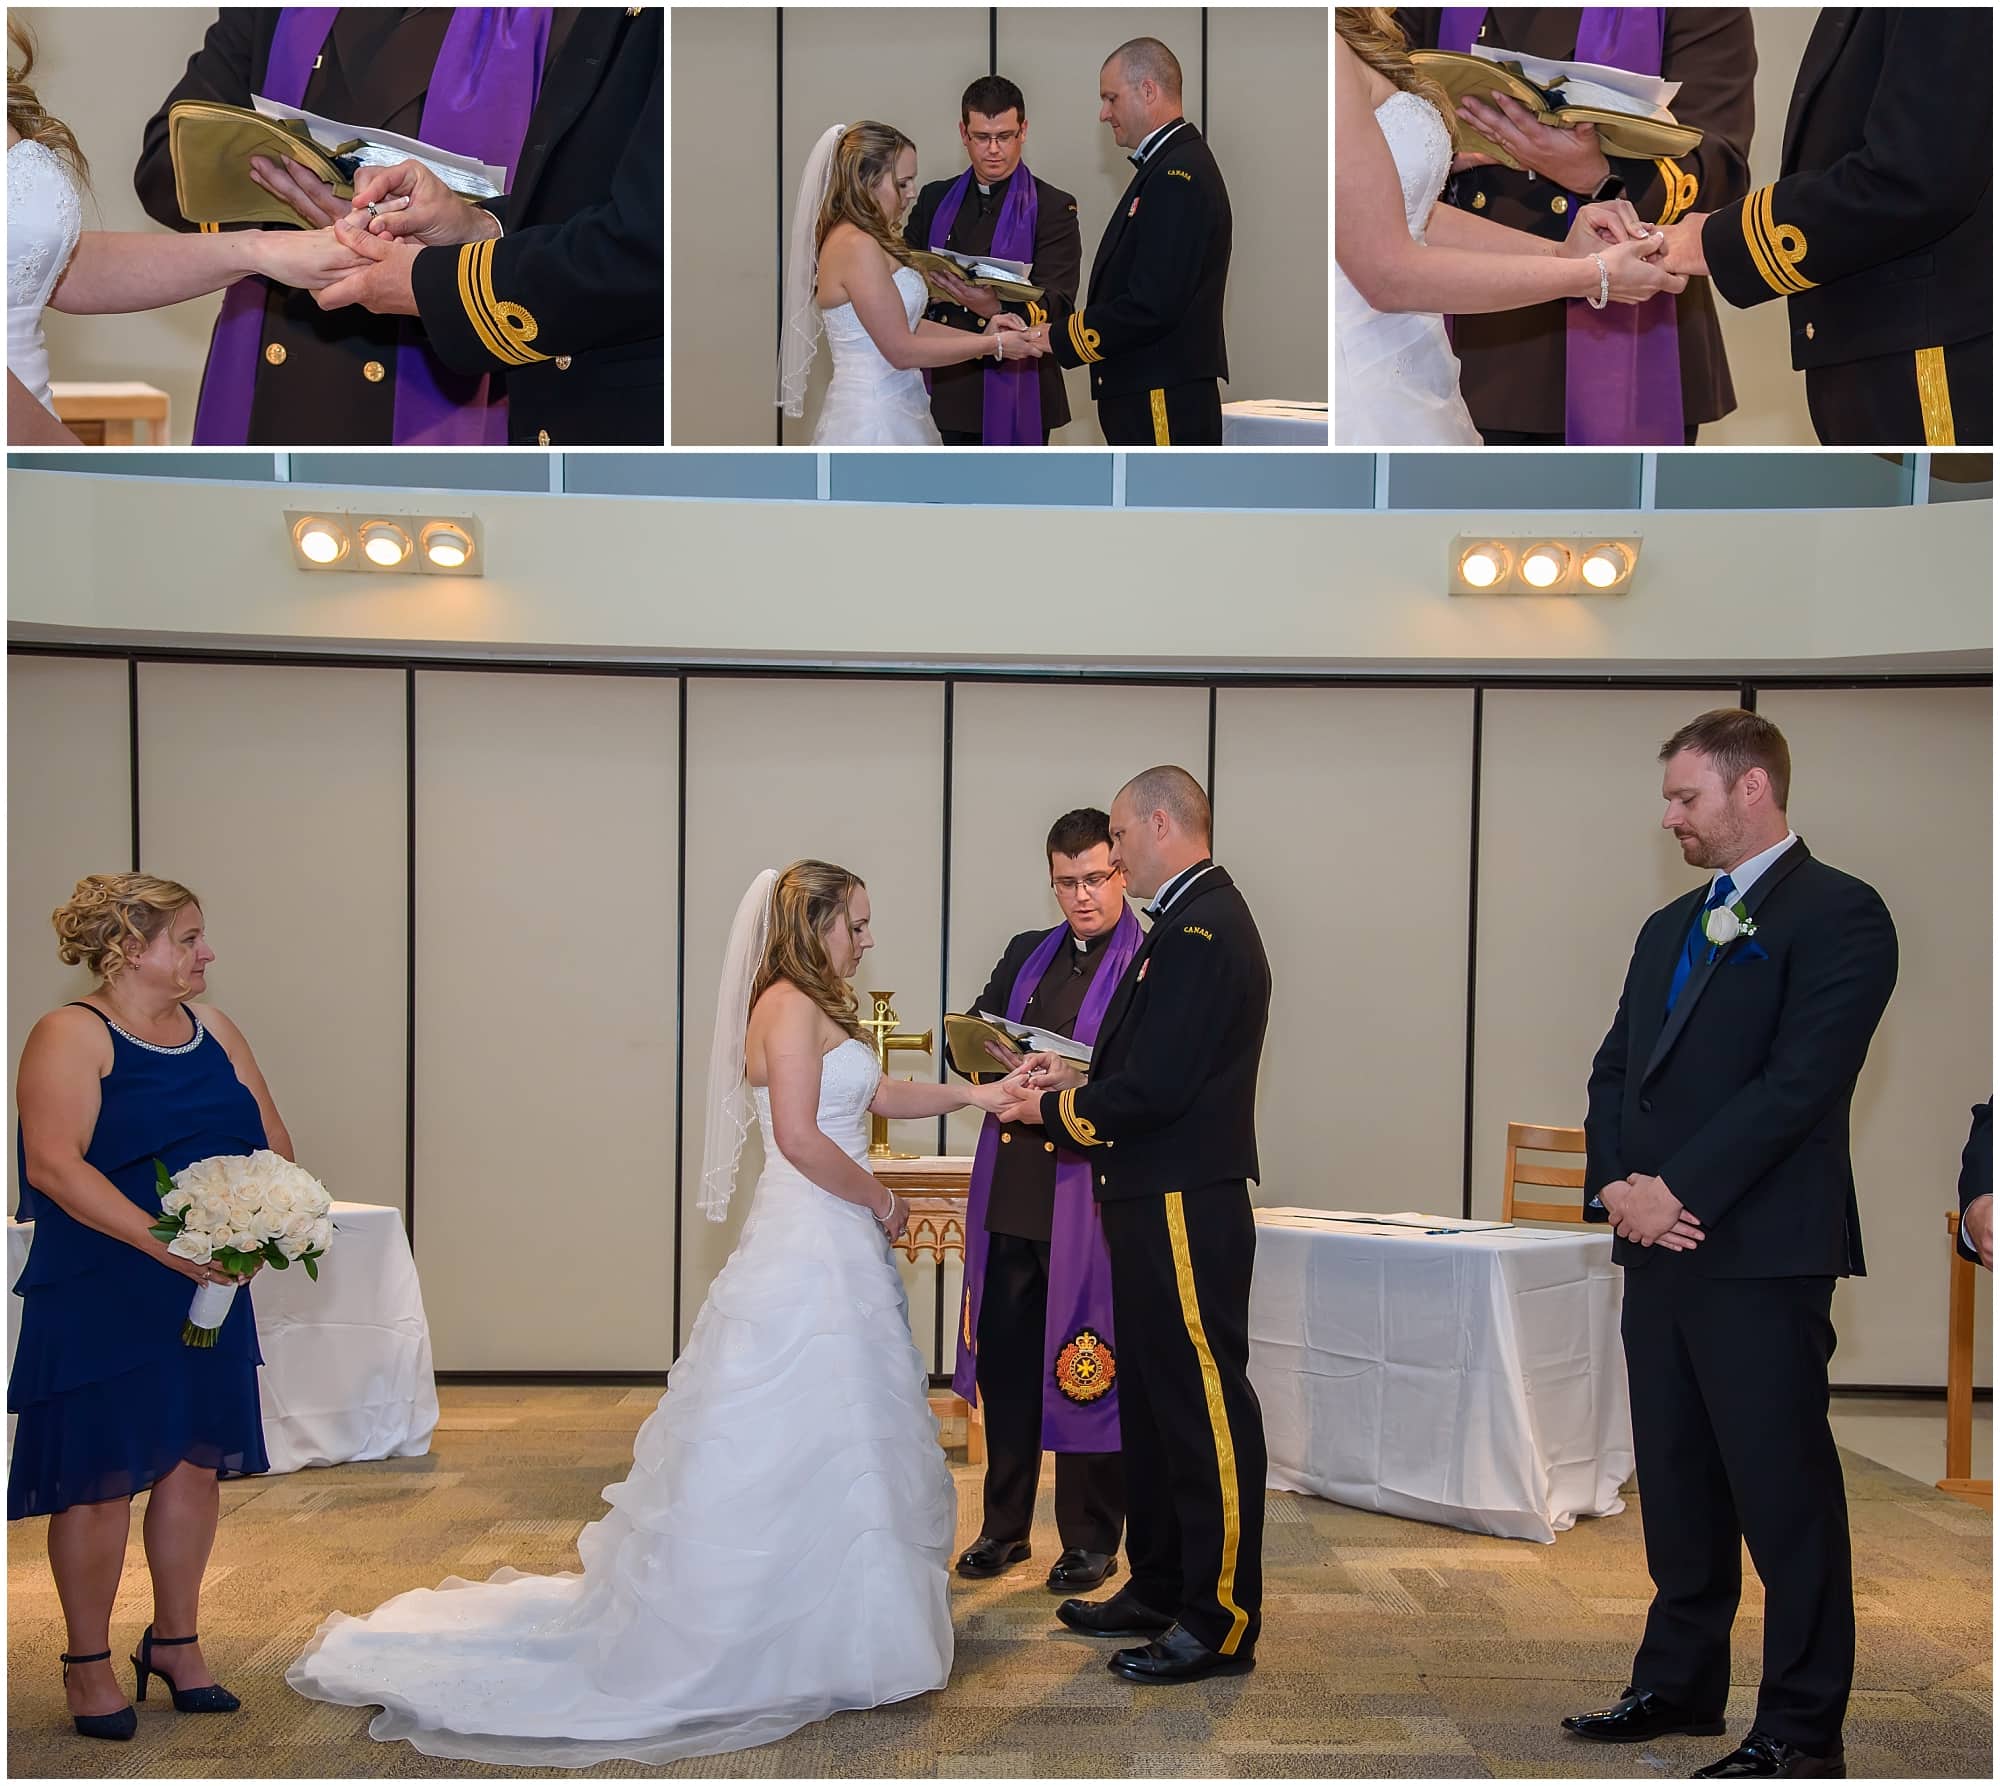 The bride and groom exchange their wedding rings during their Juno Tower wedding in Halifax, NS.